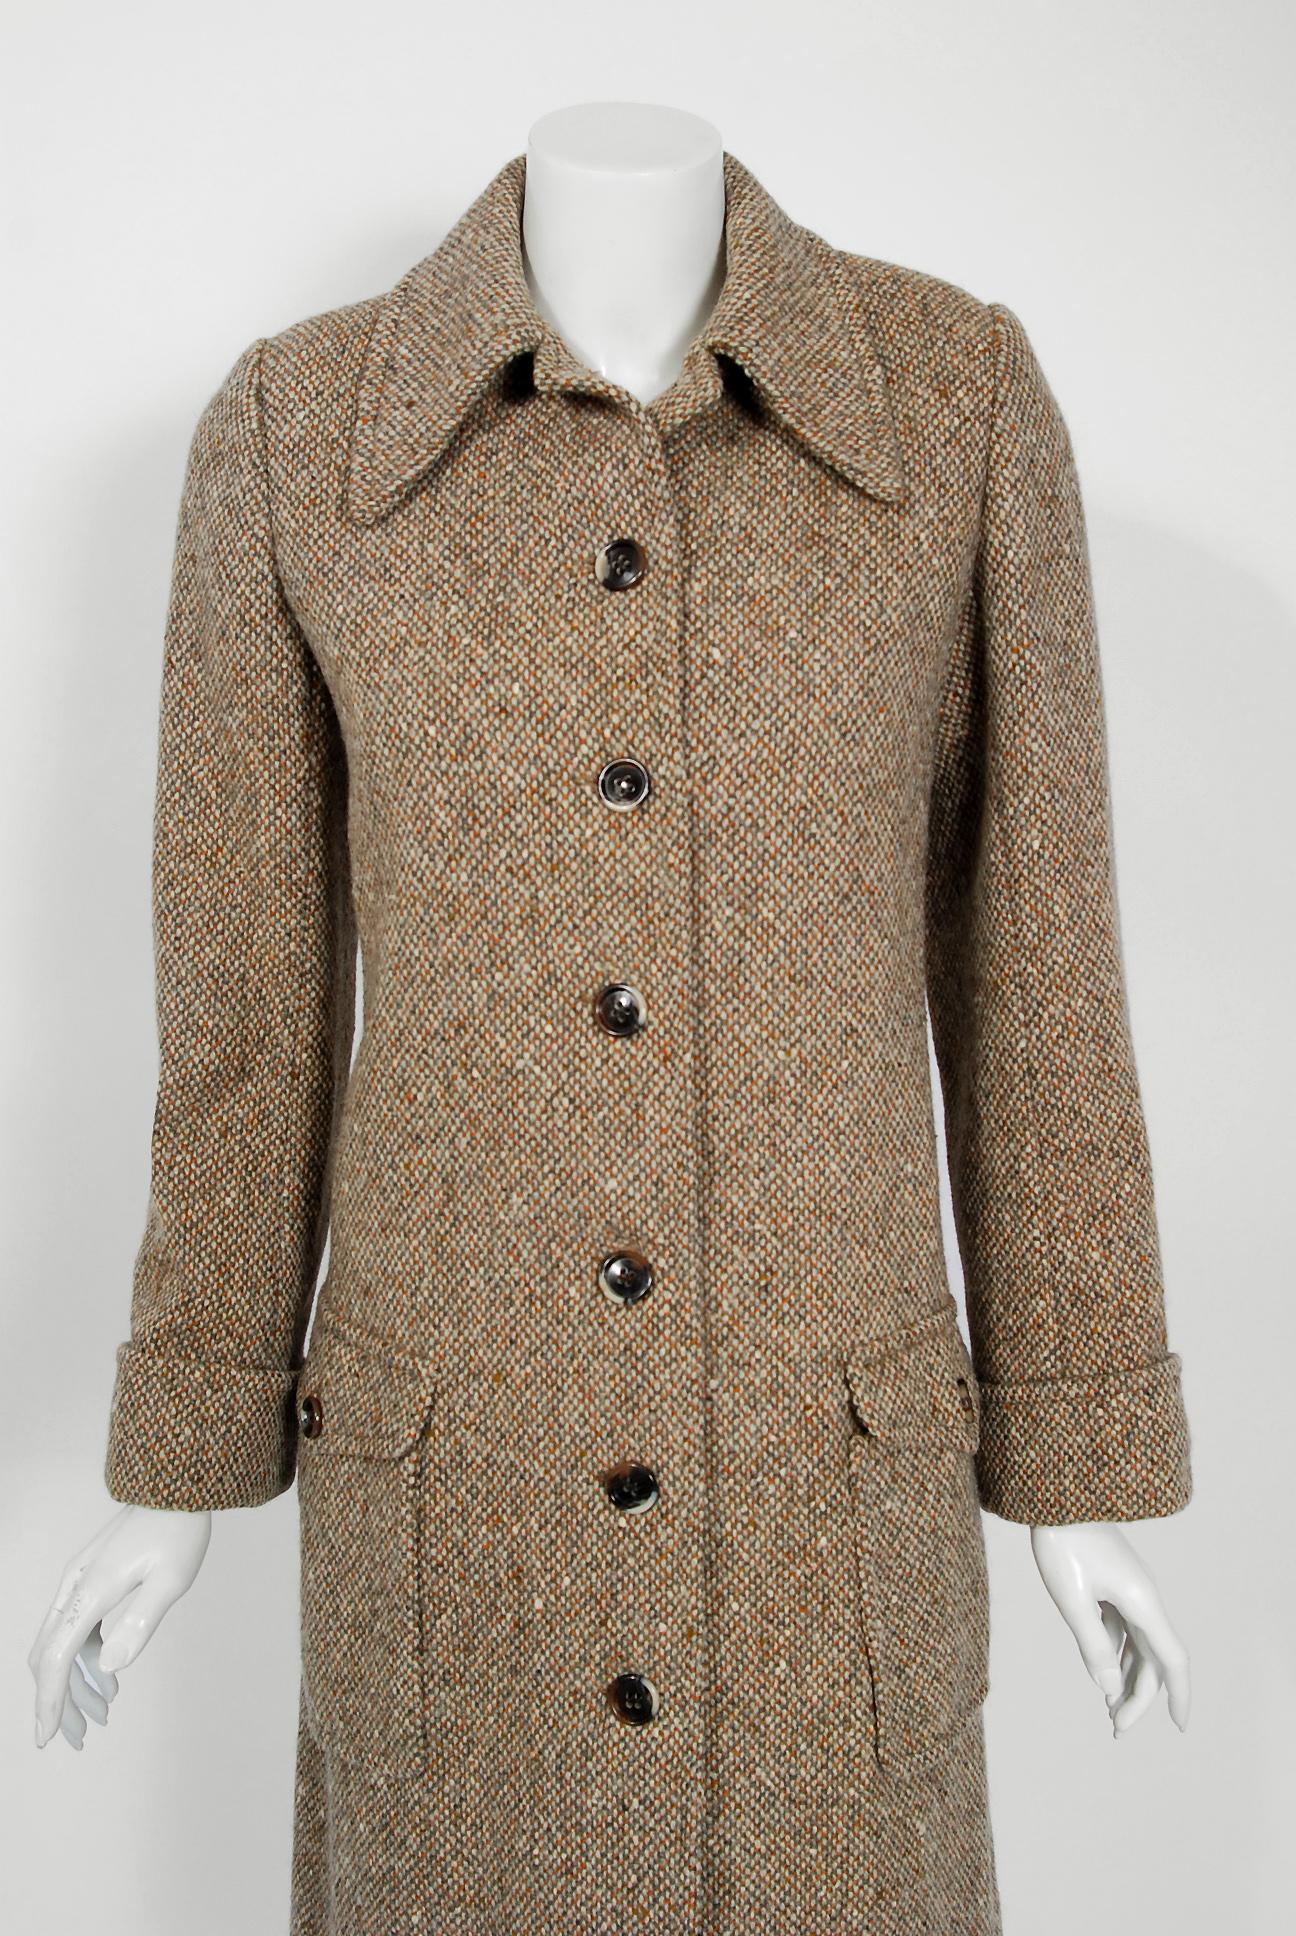 1973 Yves Saint Laurent Rive Gauche Autumn Brown Tweed Wide-Pocket Tailored Coat In Excellent Condition In Beverly Hills, CA